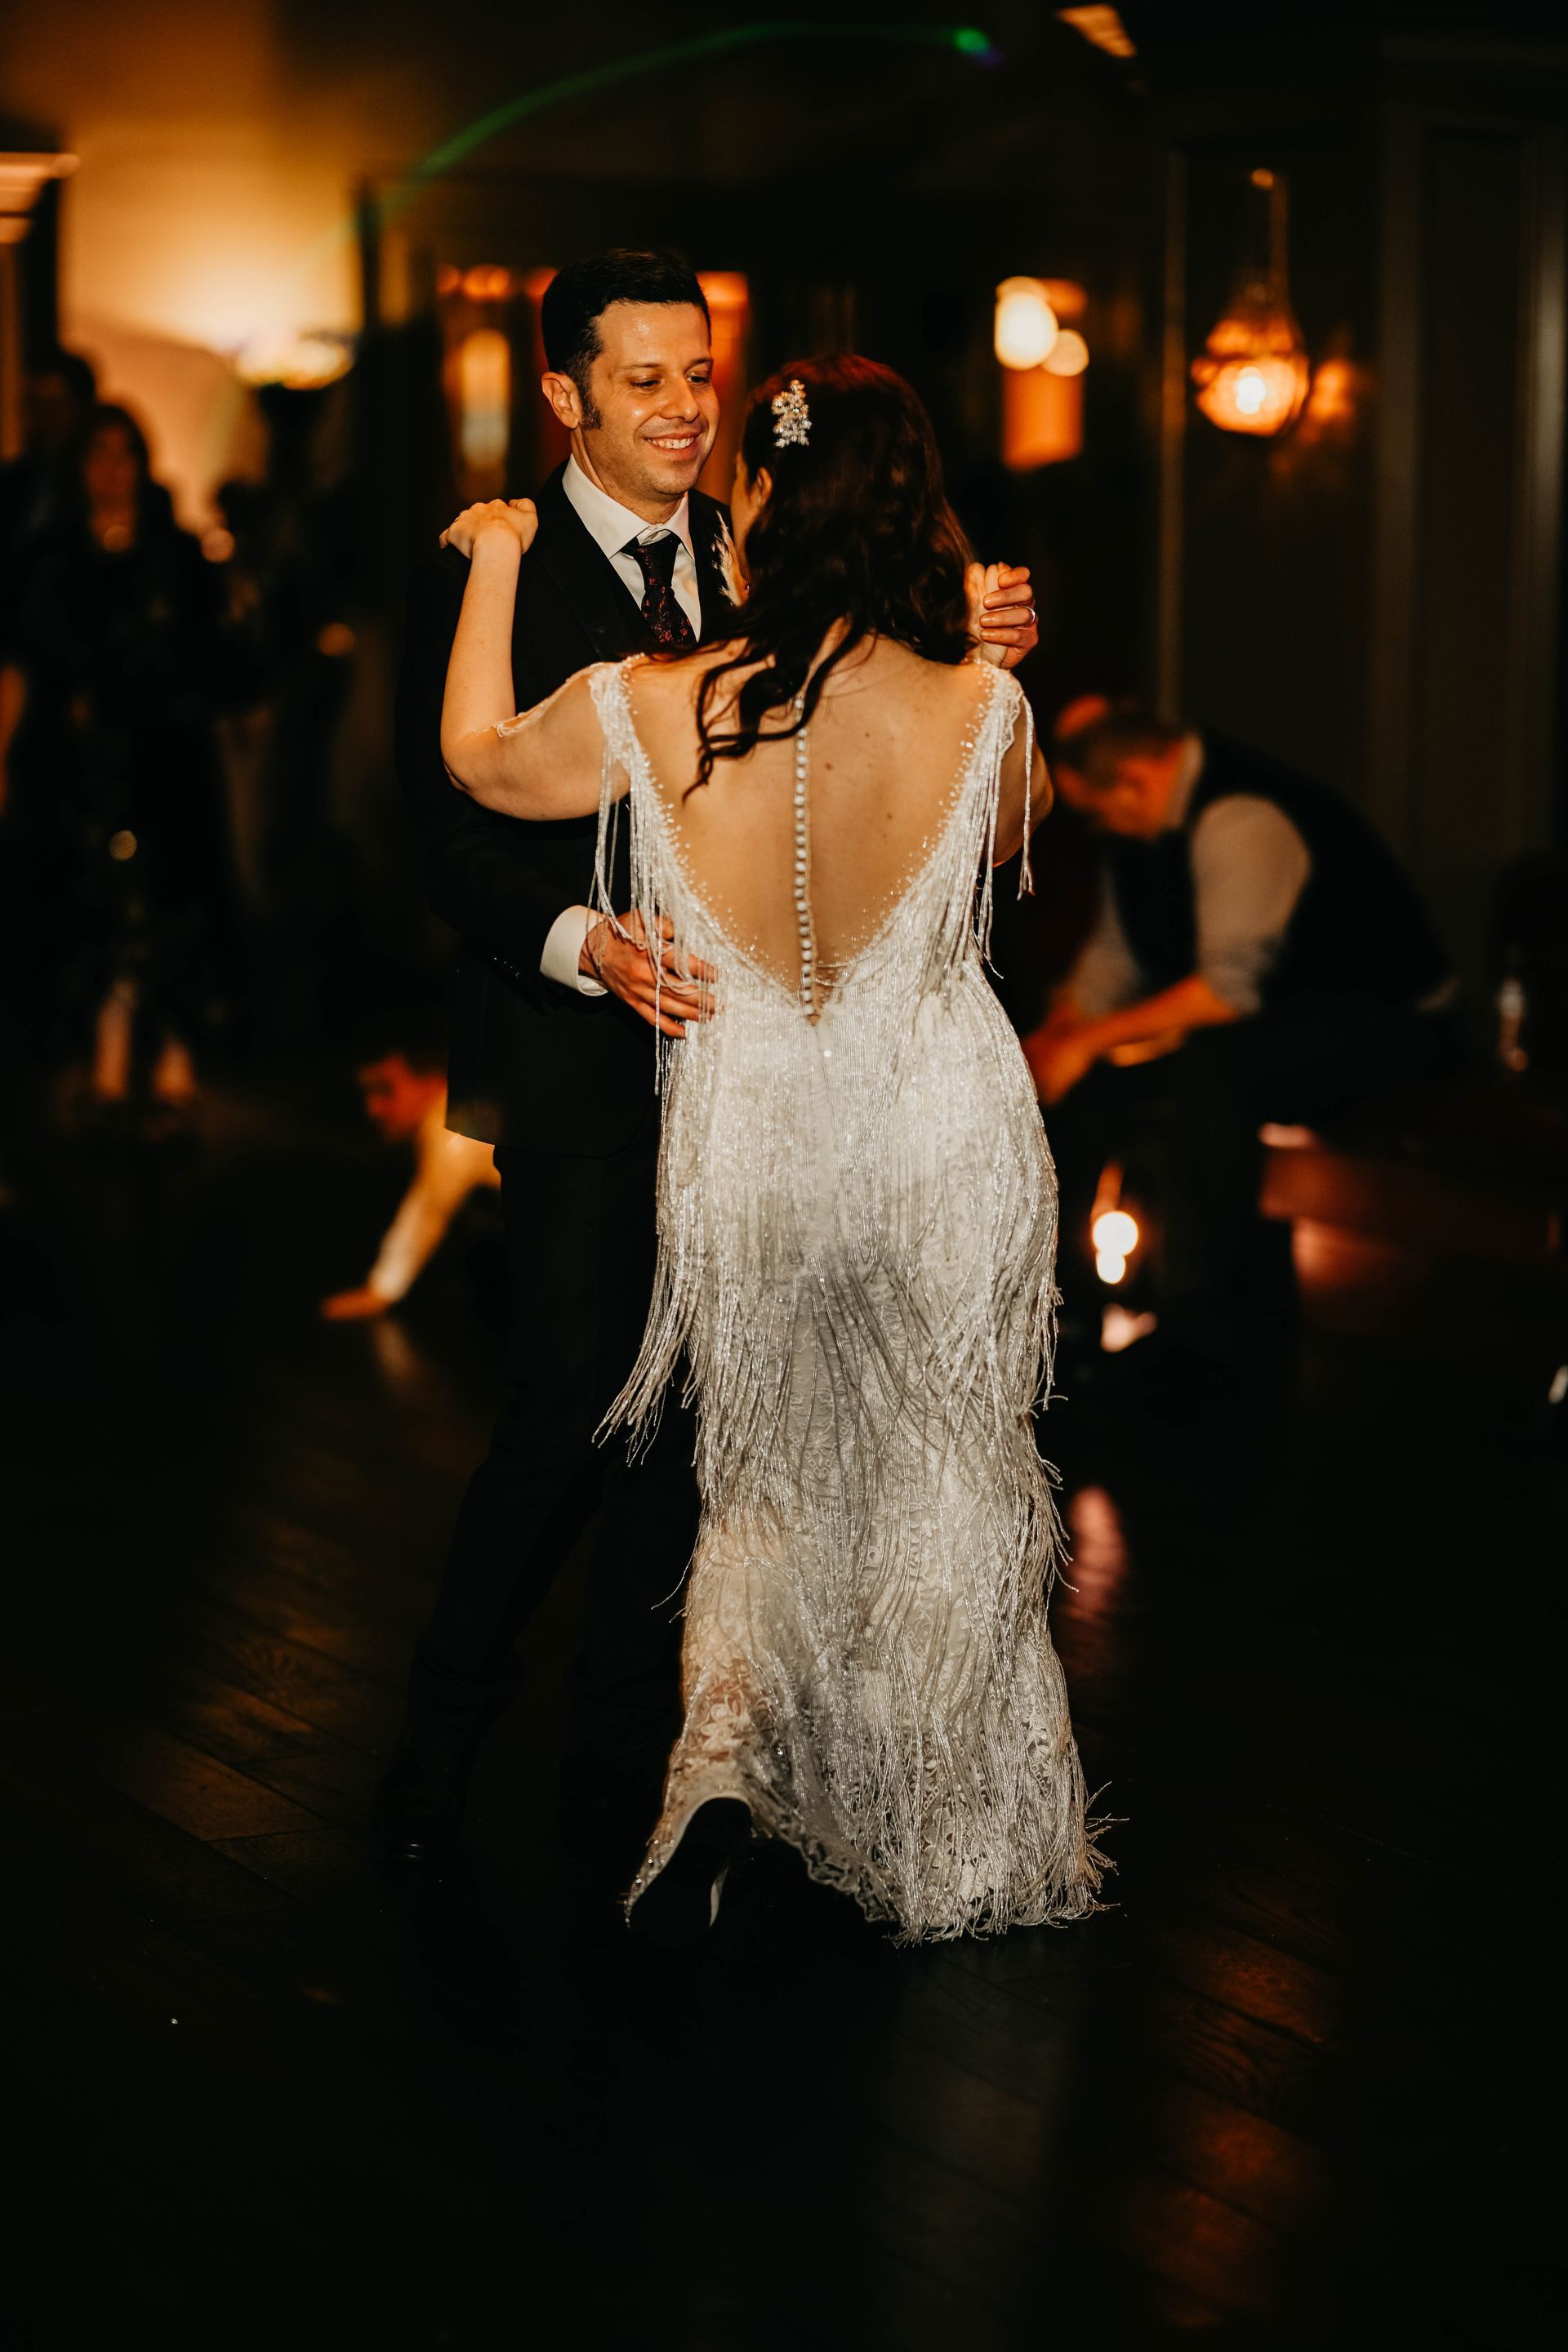 a bride and groom are dancing in a dark room